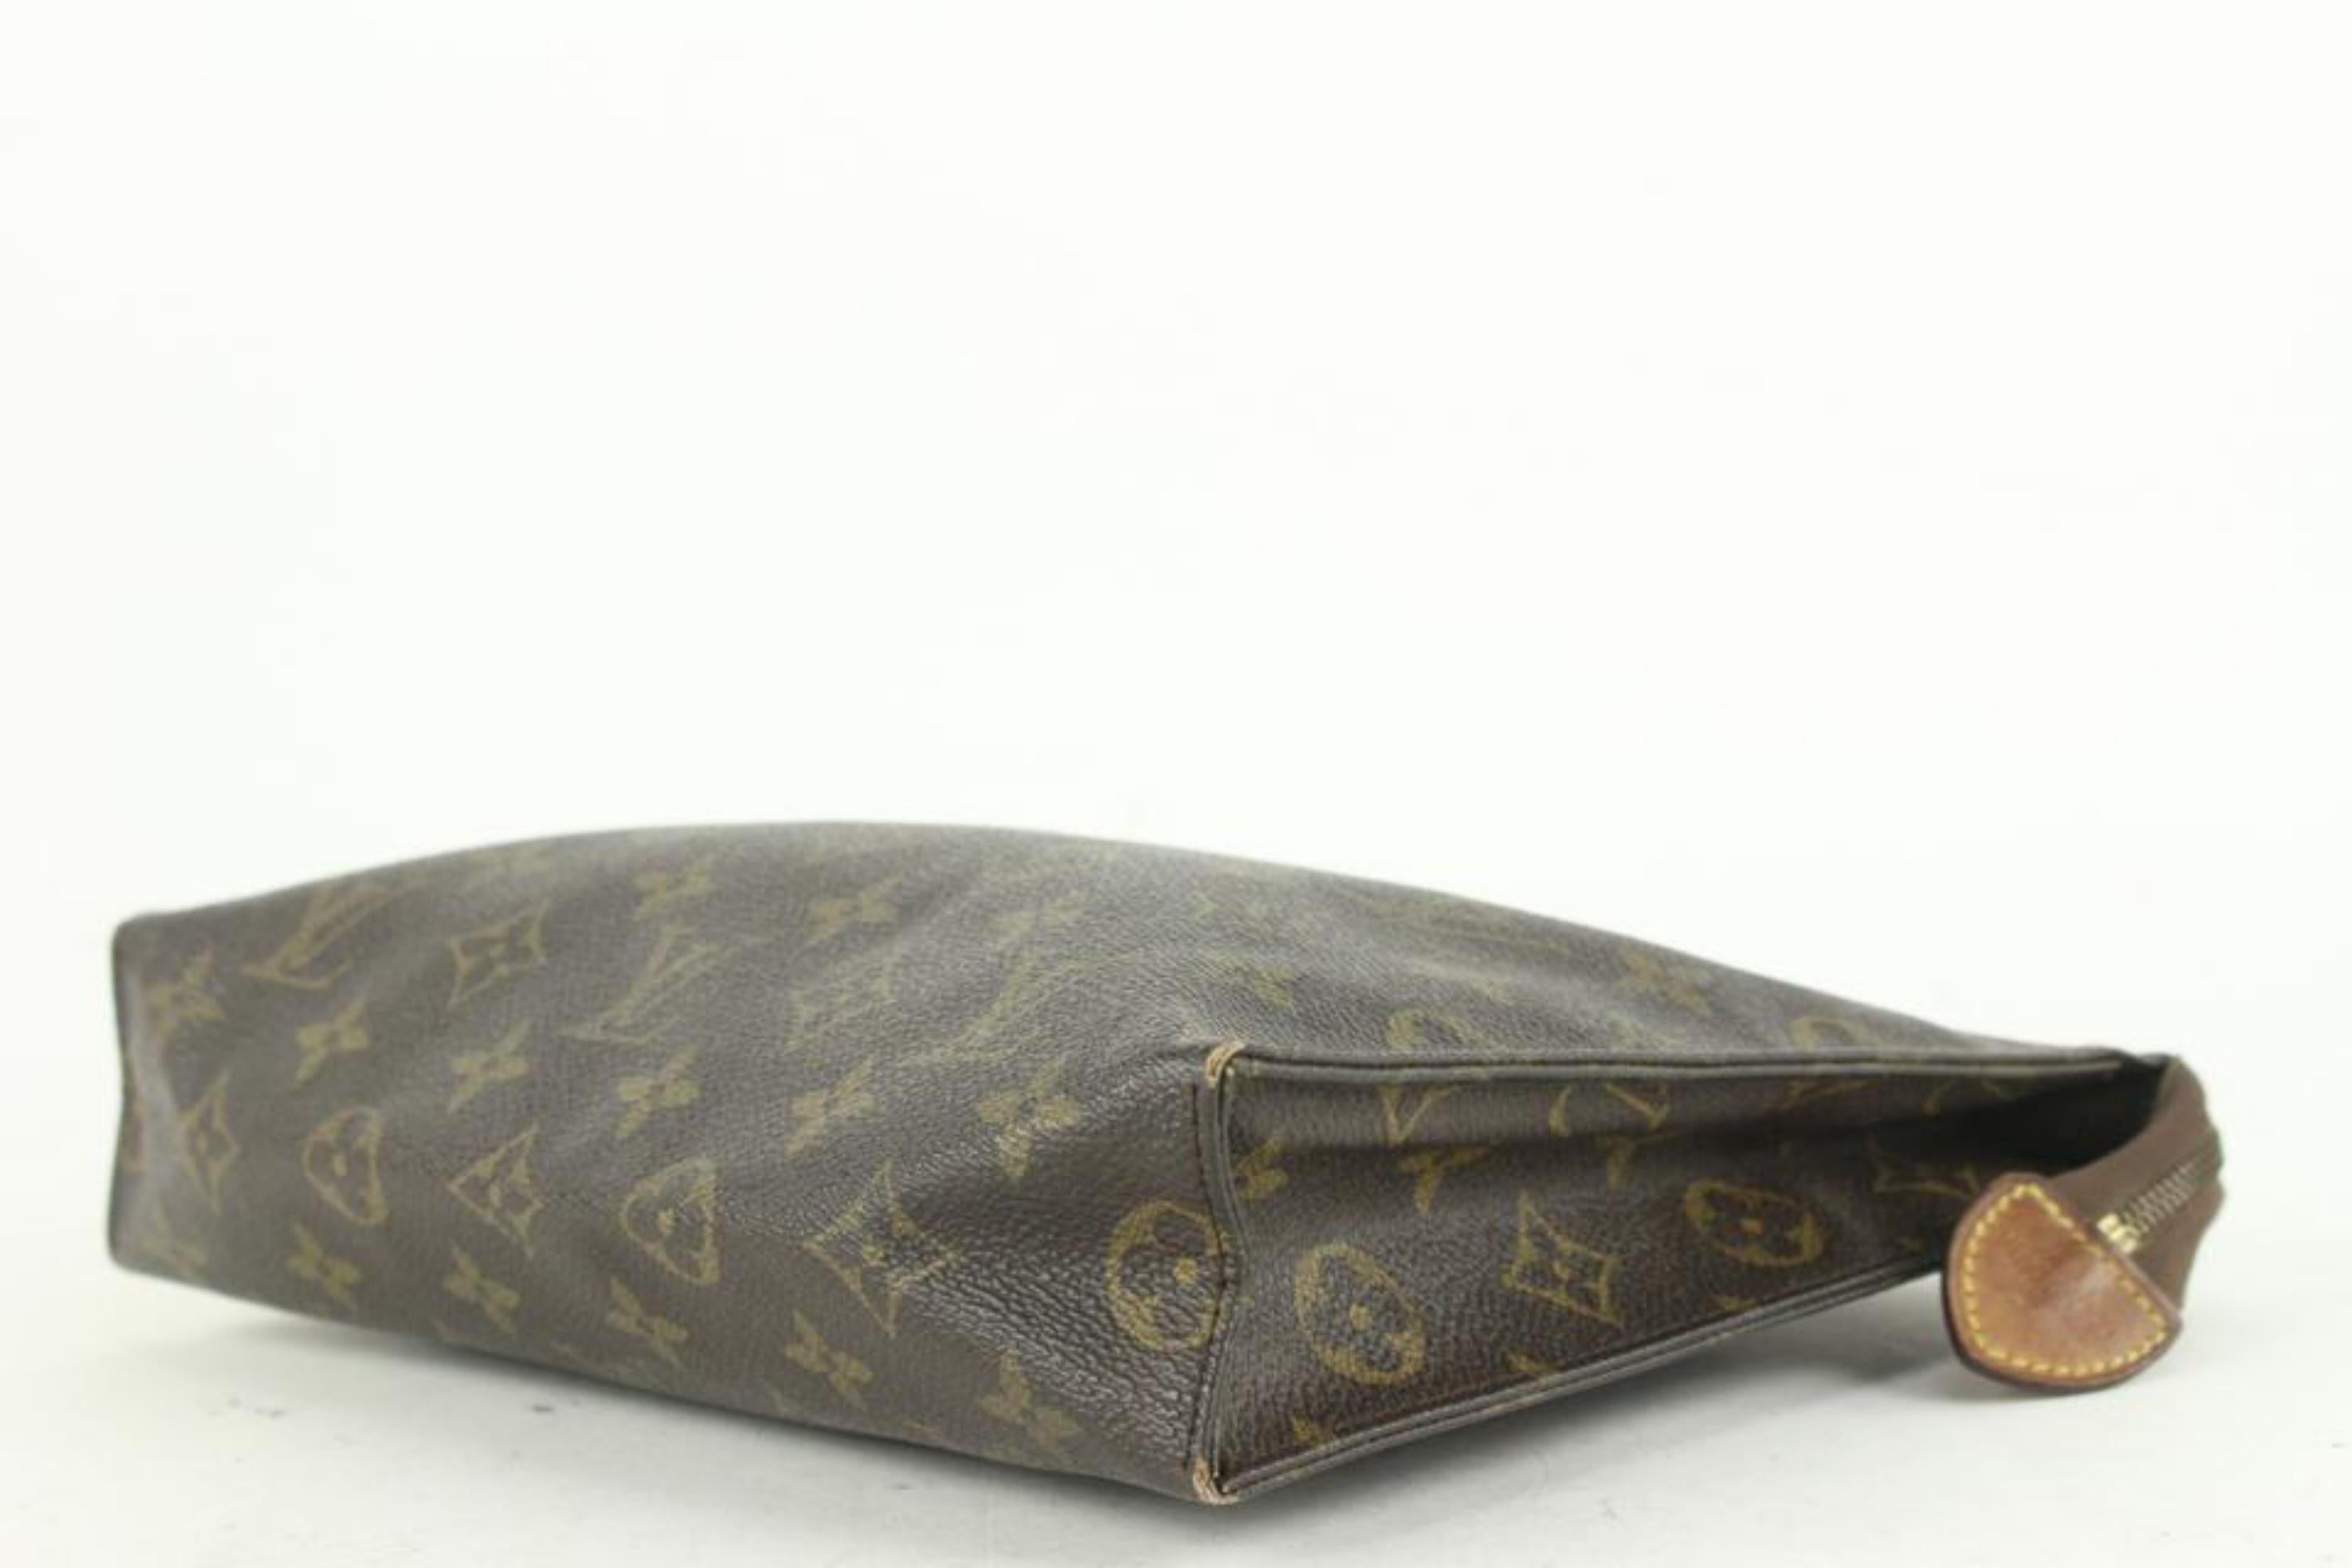 Louis Vuitton Discontinued Monogram Toiletry Pouch 26 Poche Toilette Make 1lz110 In Fair Condition For Sale In Dix hills, NY